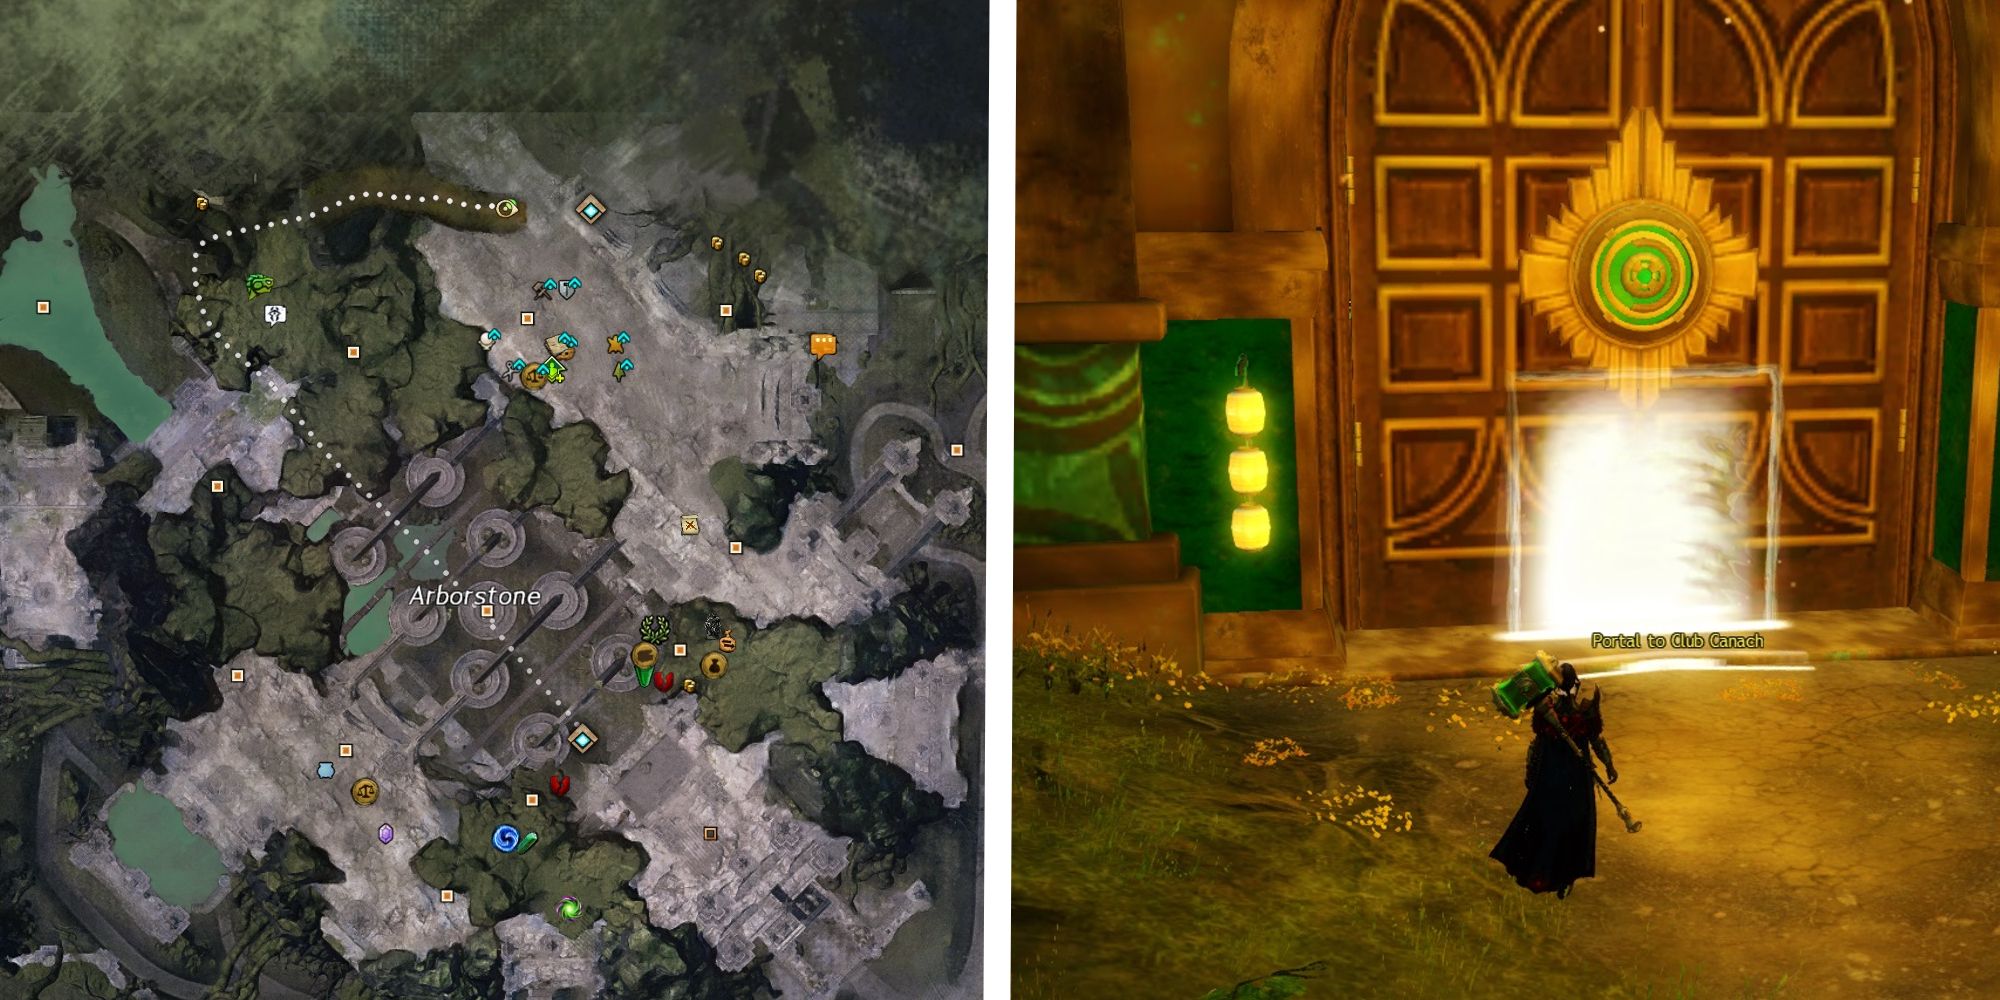 image of arborstone map next to image of club canach portal